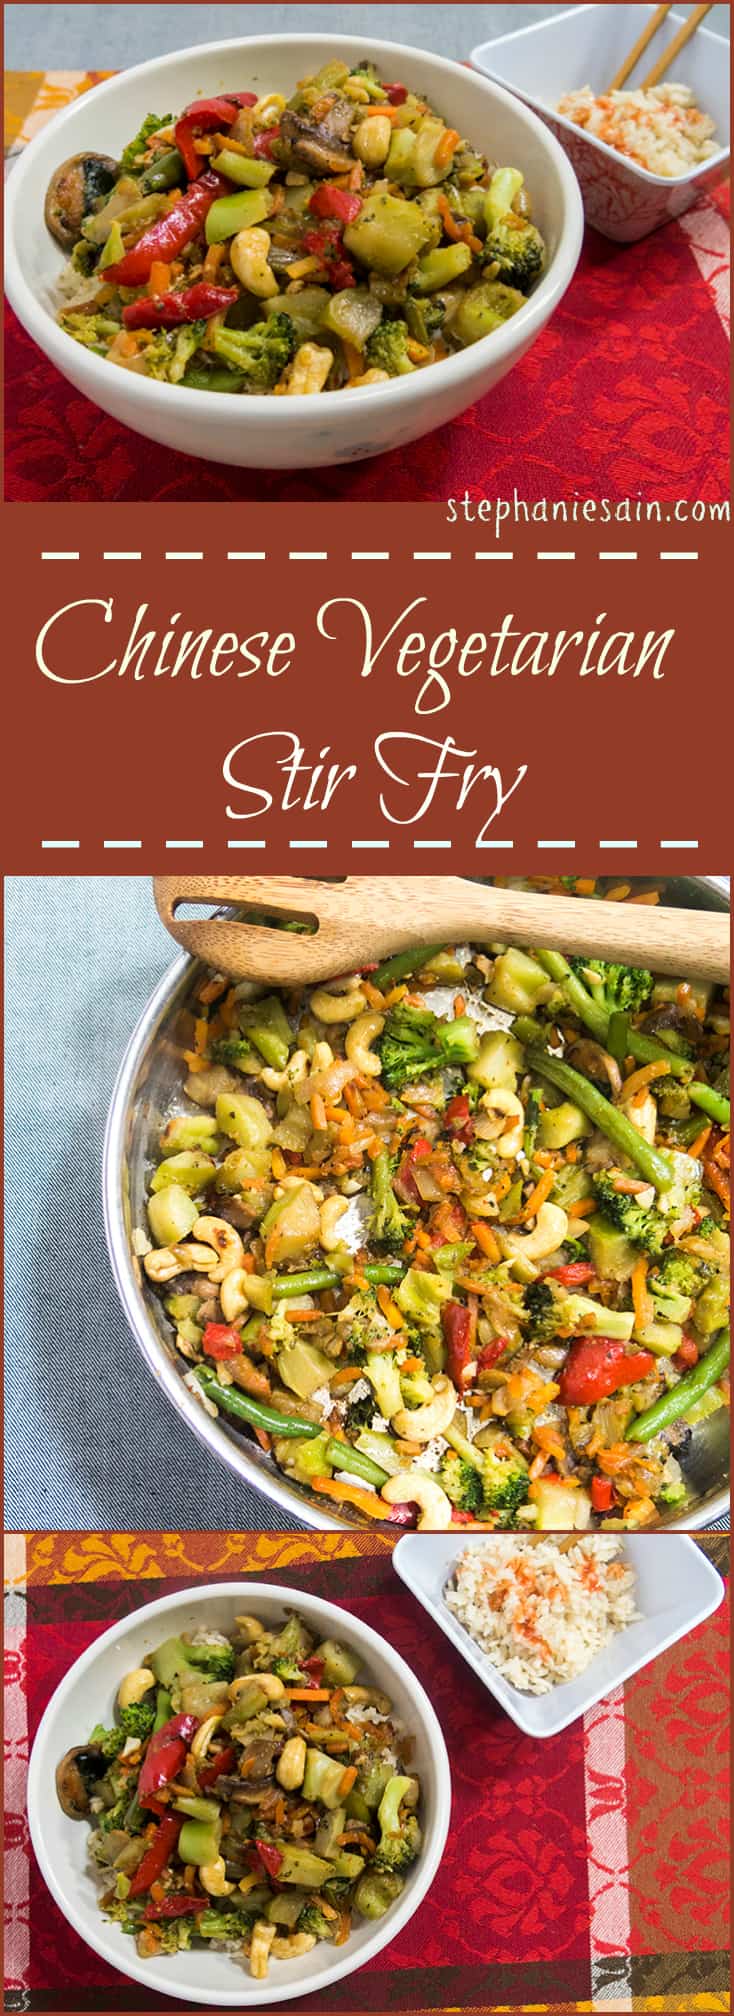 Chinese Vegetarian Stir Fry is a quick, tasty, healthy dinner perfect for any night of the week. Better than takeout. Vegetarian, Vegan, and Gluten Free.